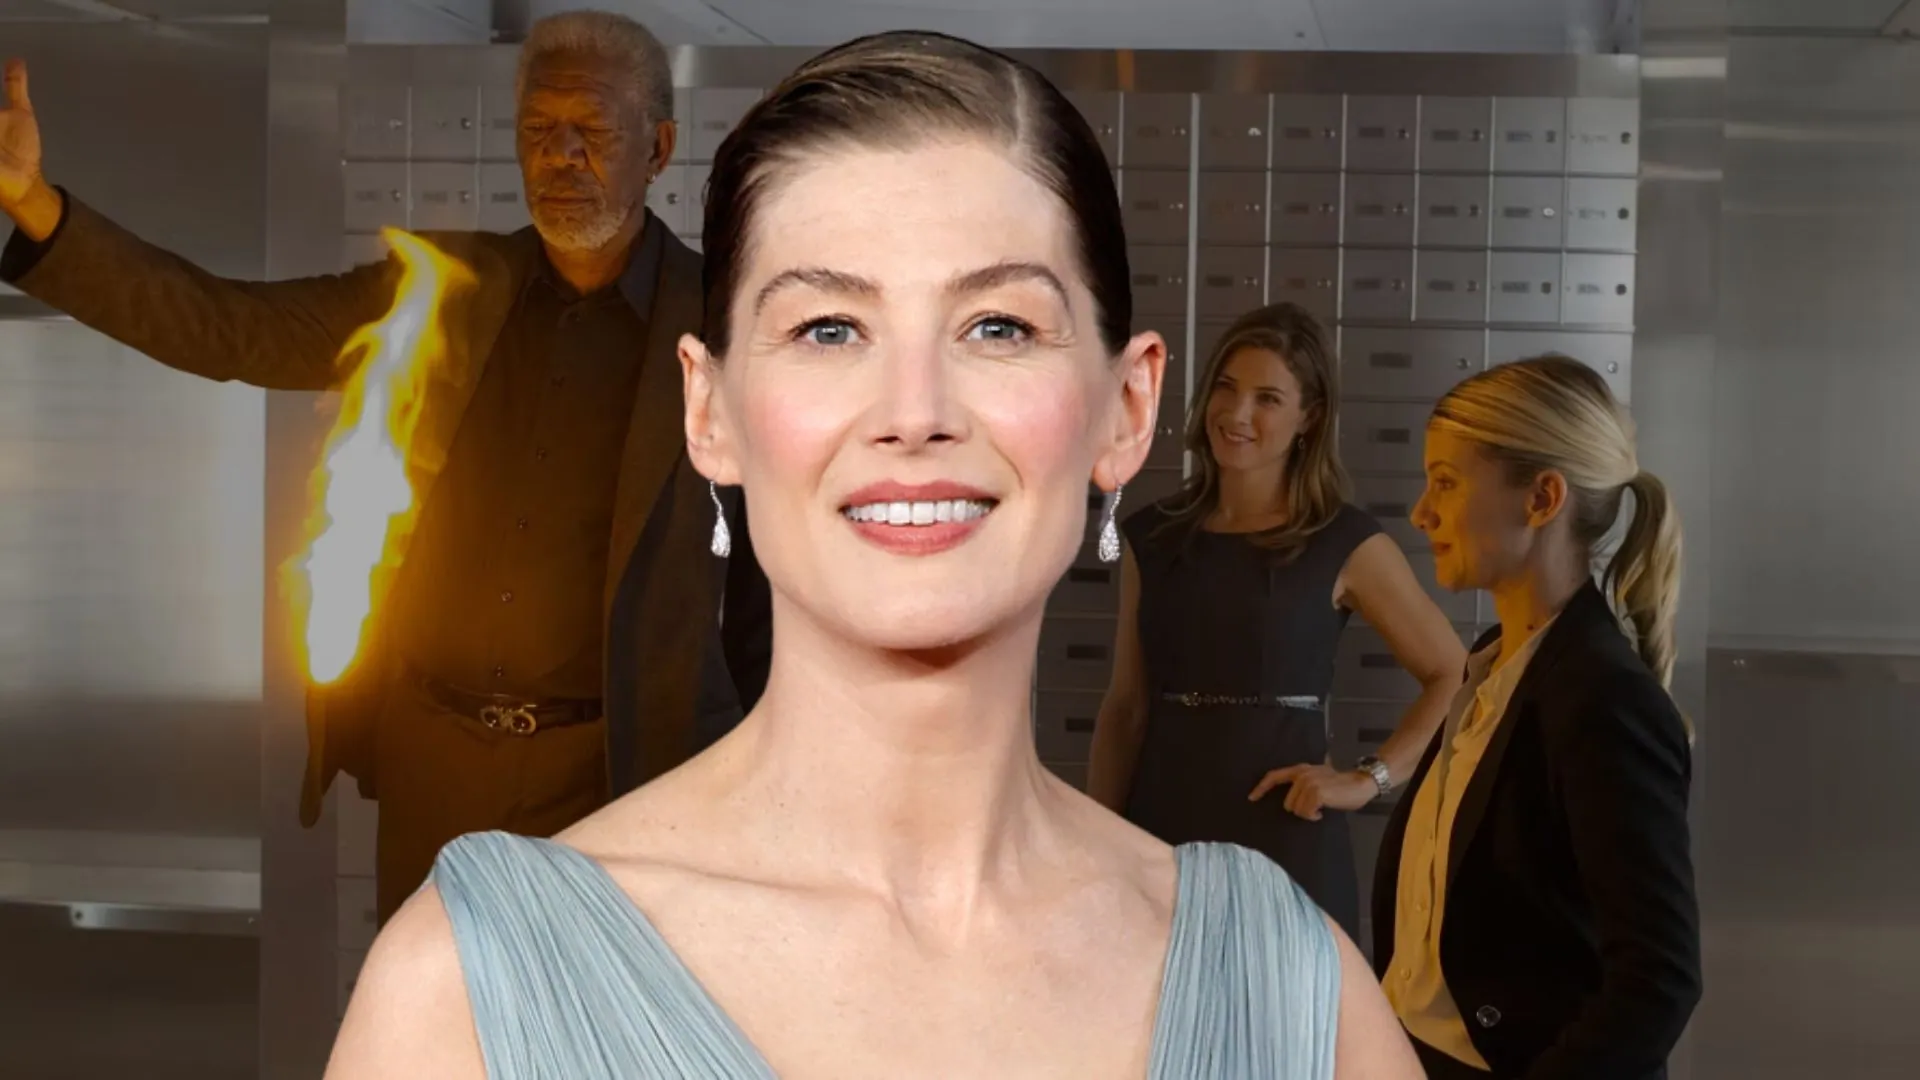 'Now You See Me 3' Cast Expands with Rosamund Pike in Mystery Role'Now You See Me 3' Cast Expands with Rosamund Pike in Mystery Role